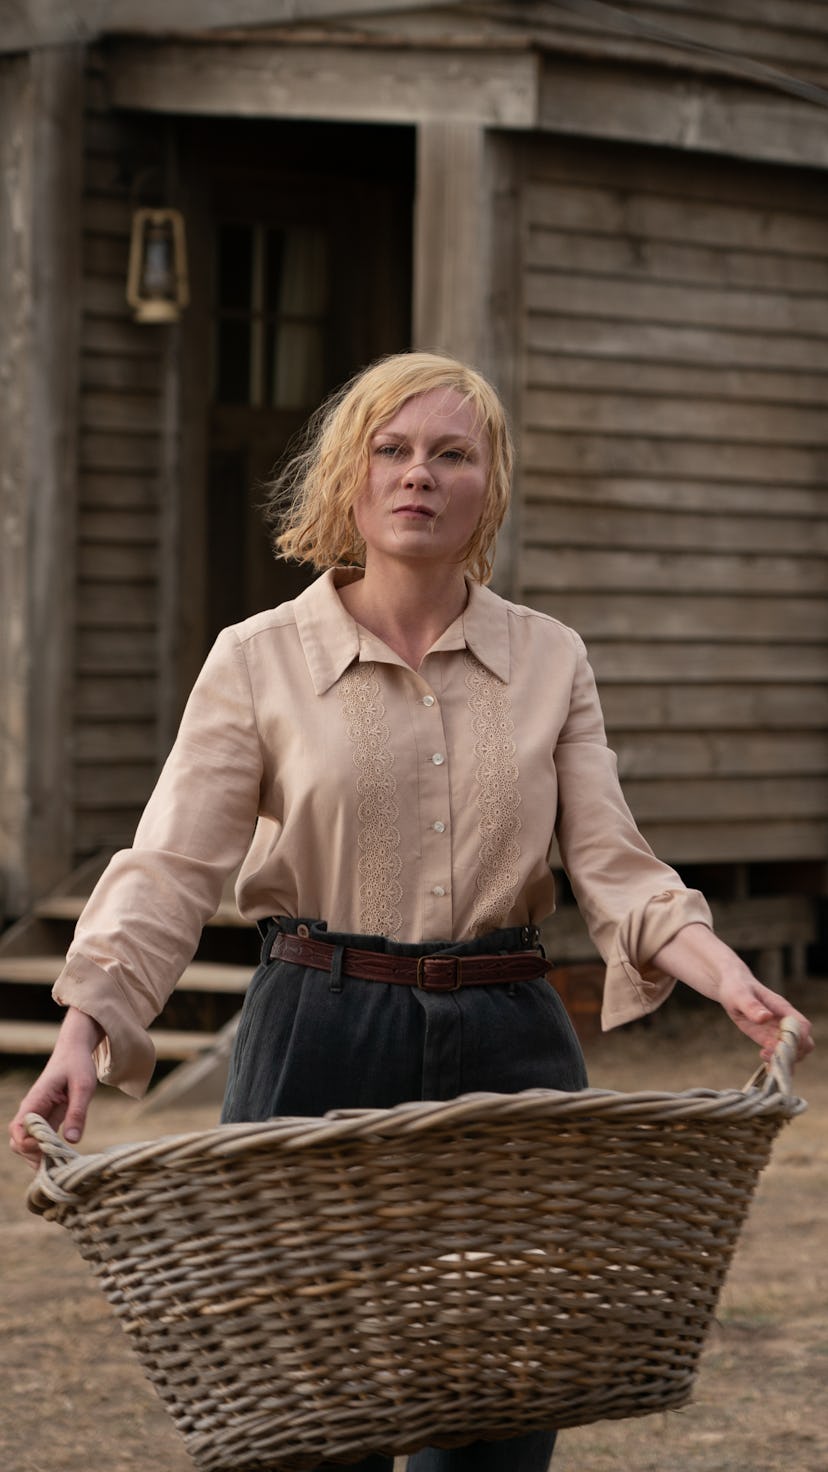 KIRSTEN DUNST as ROSE GORDON in 'THE POWER OF THE DOG.'